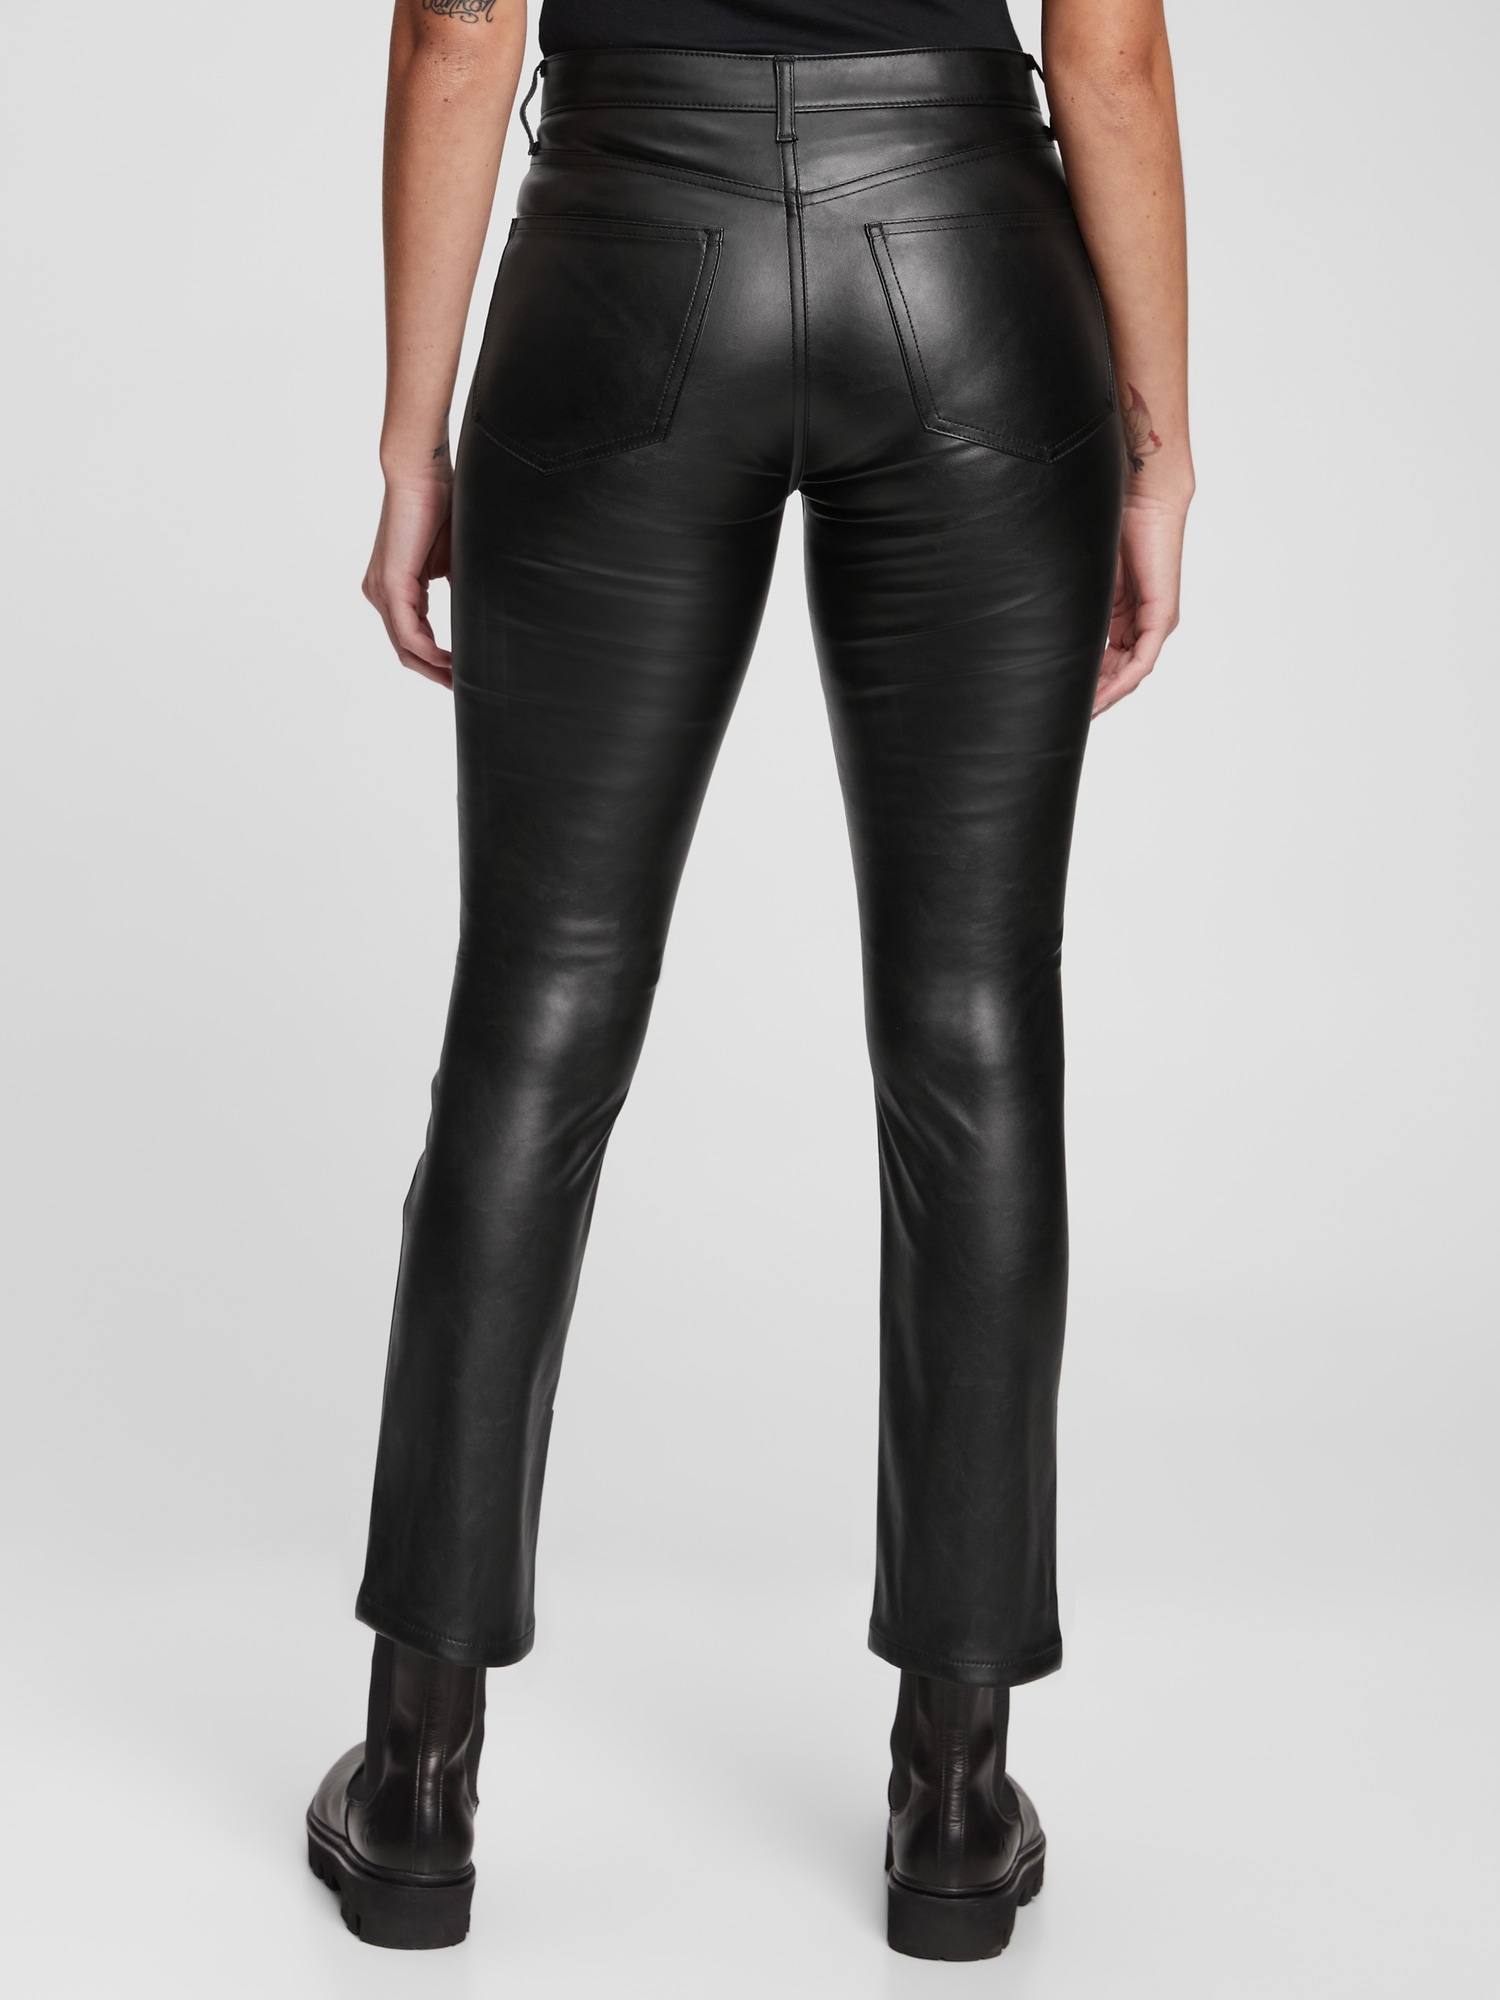 H&M Black Leather Leggings / Pants Size M - $24 - From Brianna